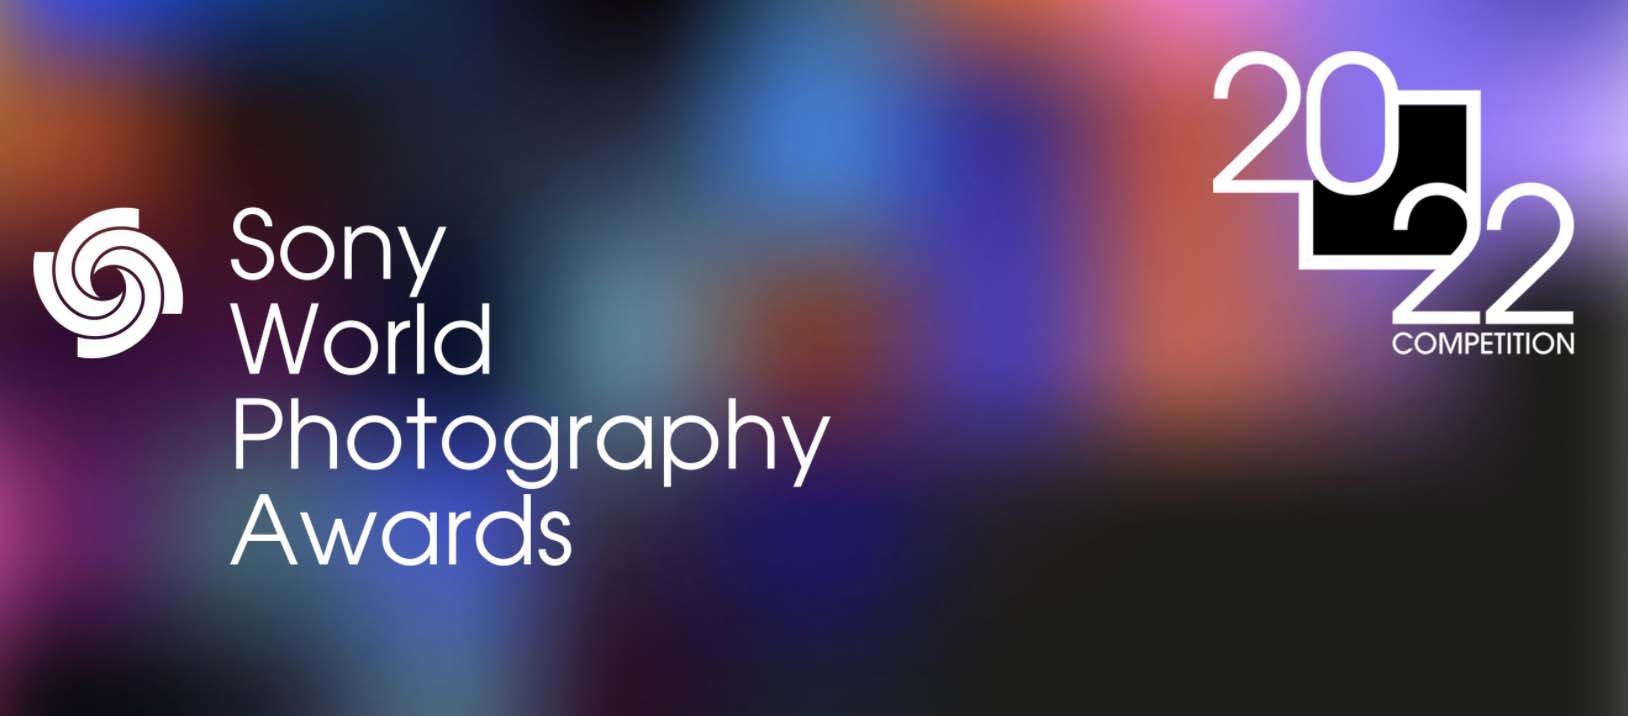 Call for Submissions: Sony World Photography Awards 2022